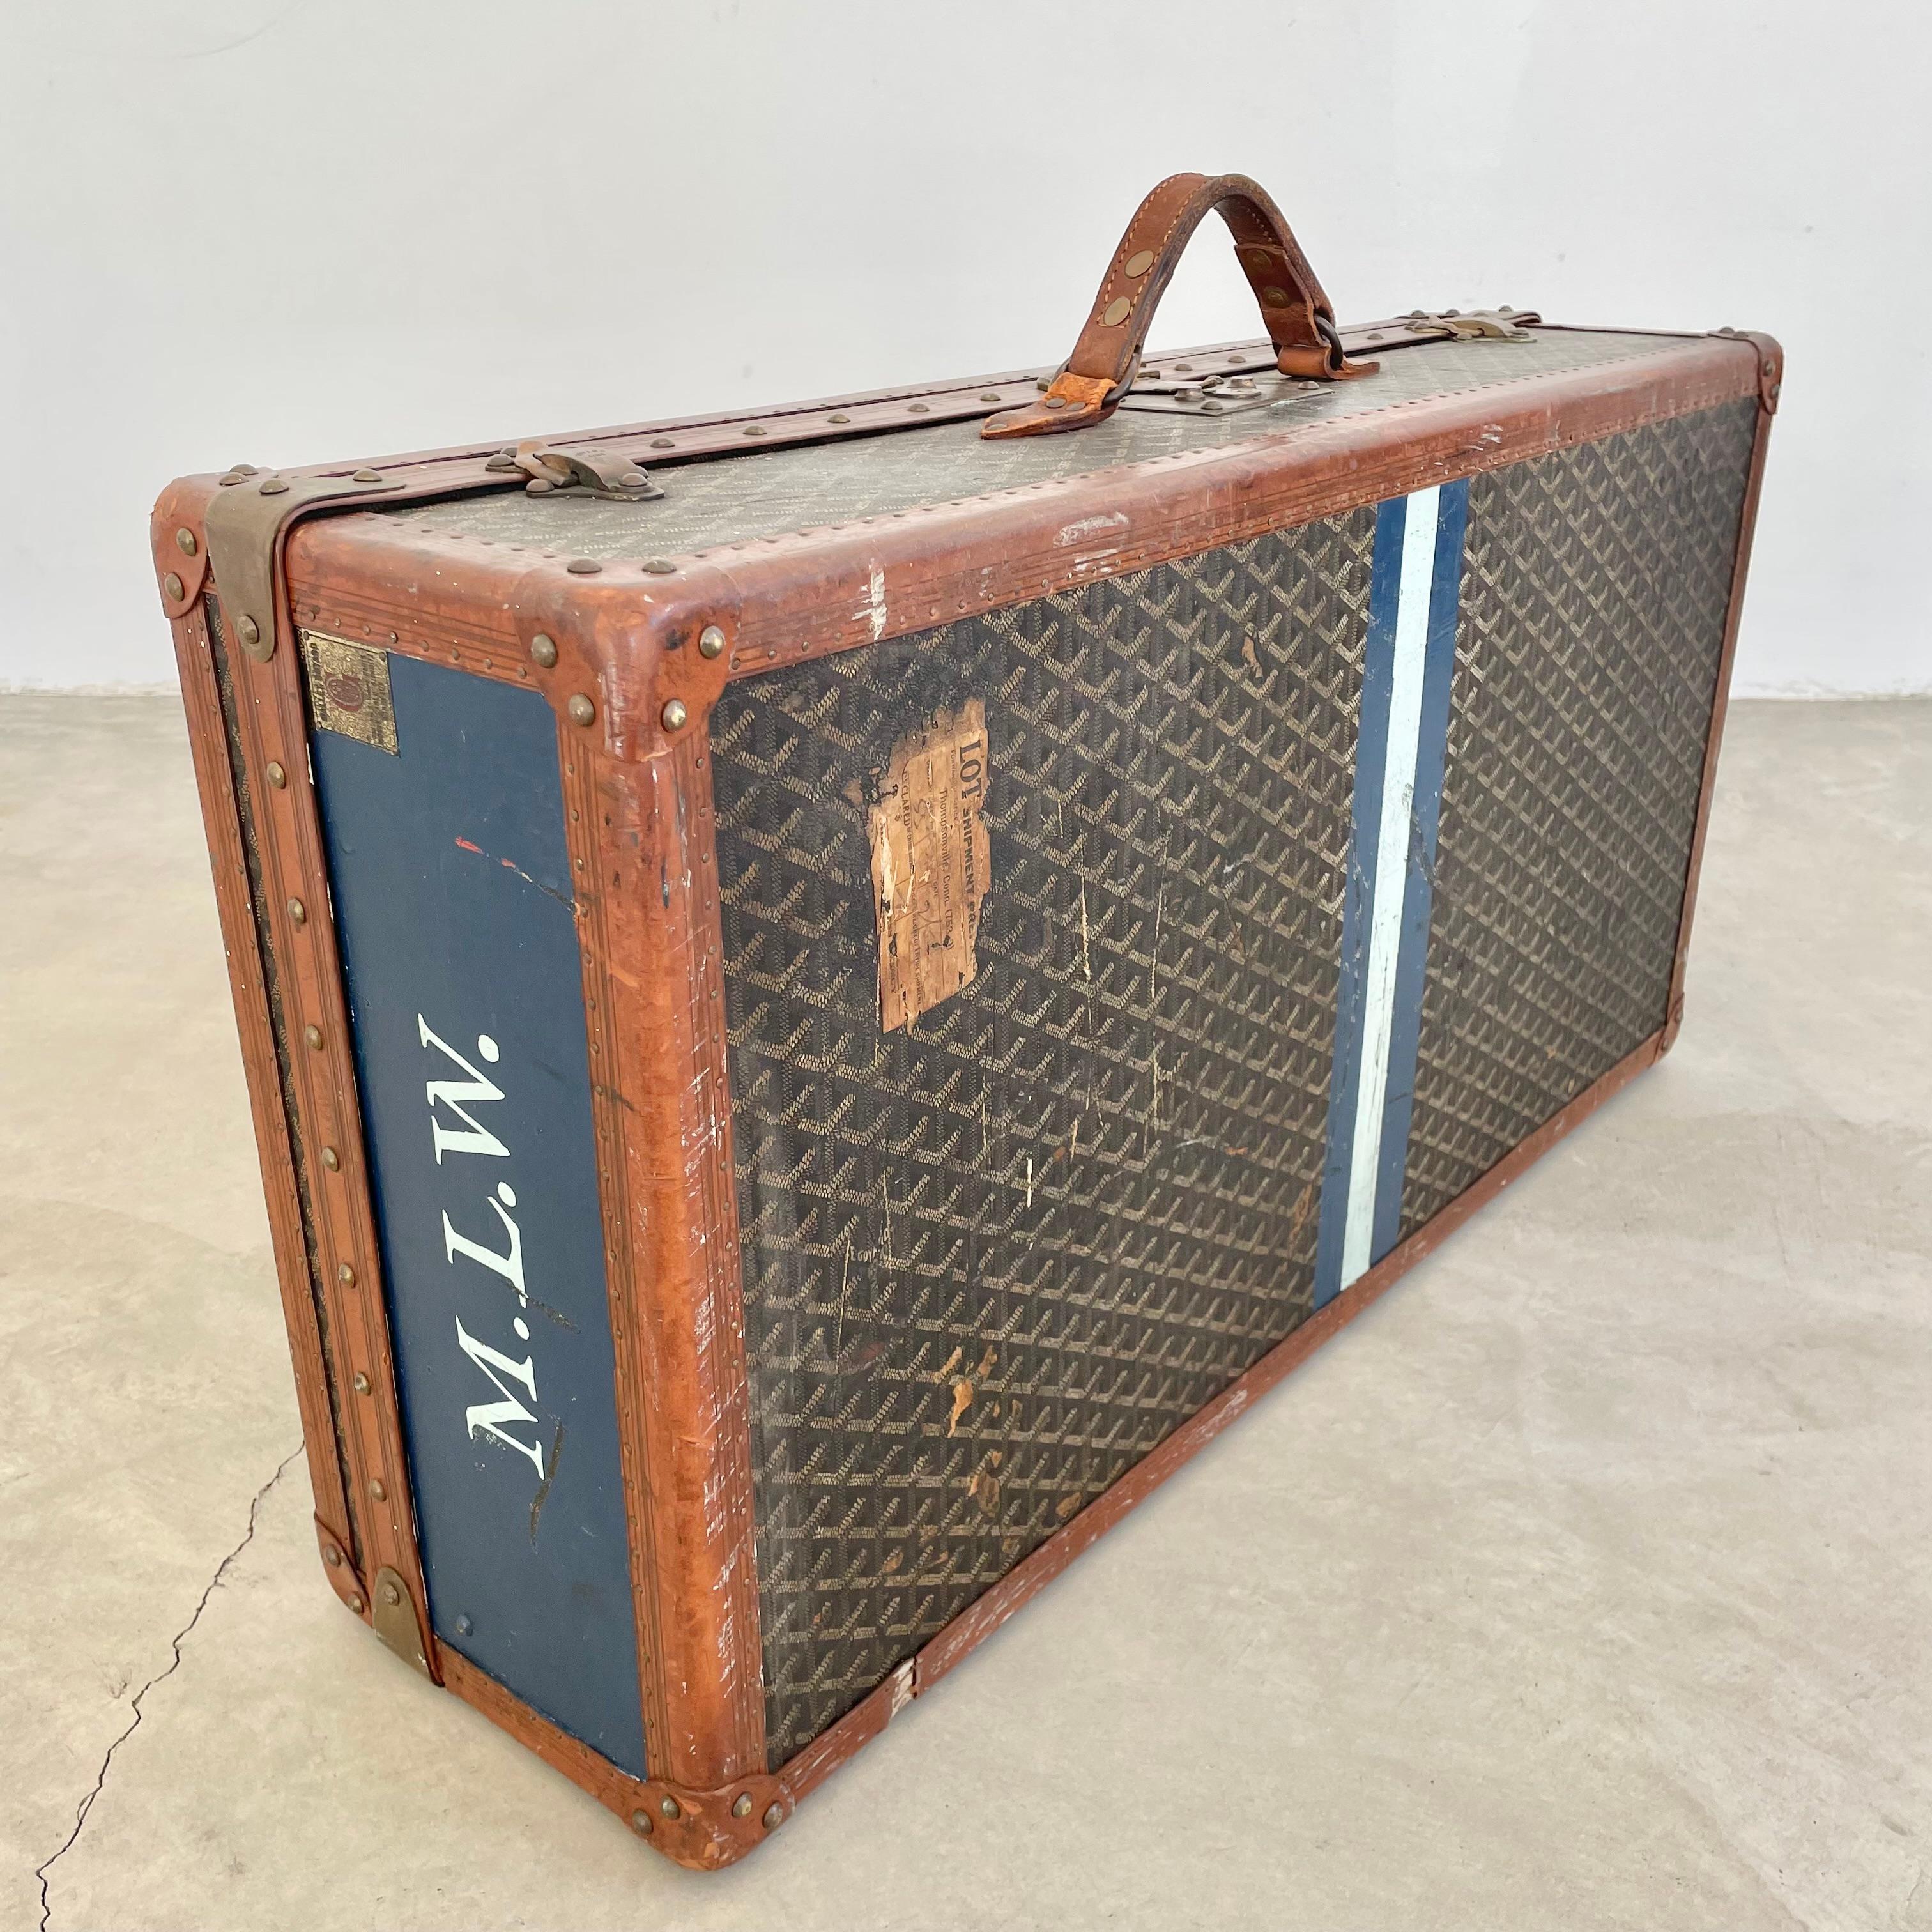 Classic vintage Goyard trunk. Wooden frame wrapped in the iconic Goyard canvas print with saddle leather and brass hardware. Incredible patina and coloring to leather and canvas. Accents of blue and white paint give this trunk amazing charachter.